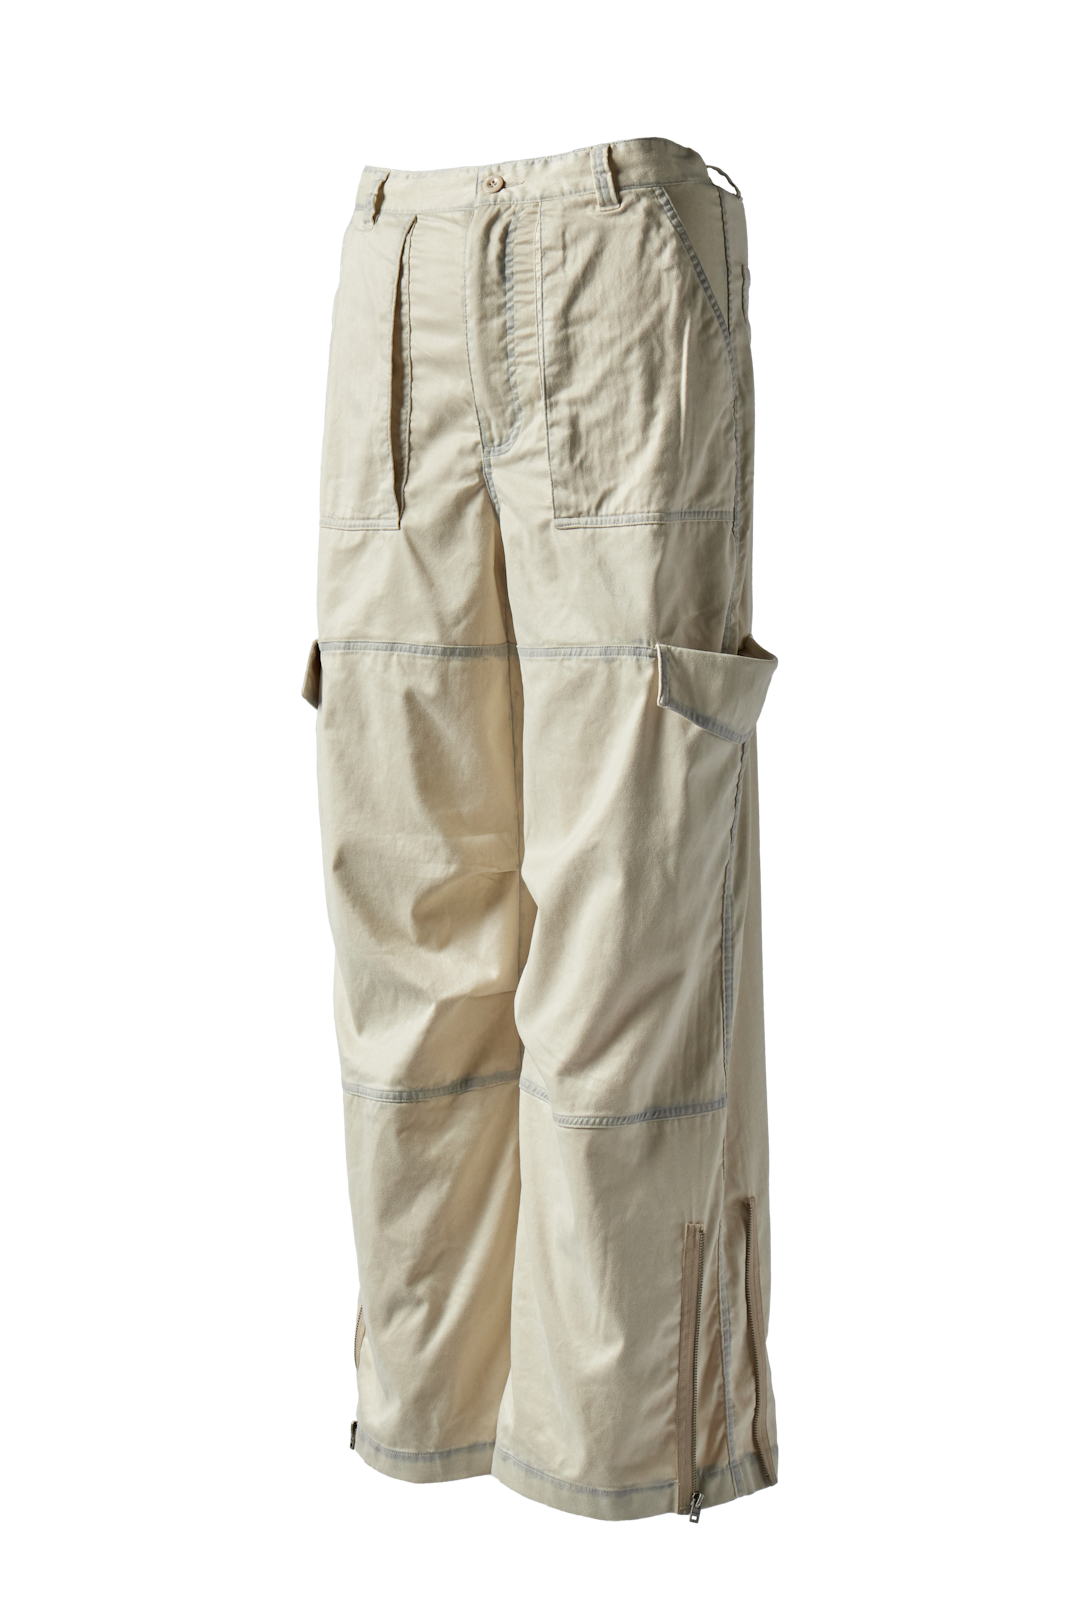 ACNE STUDIOS - Stained White Zip Trouser product image